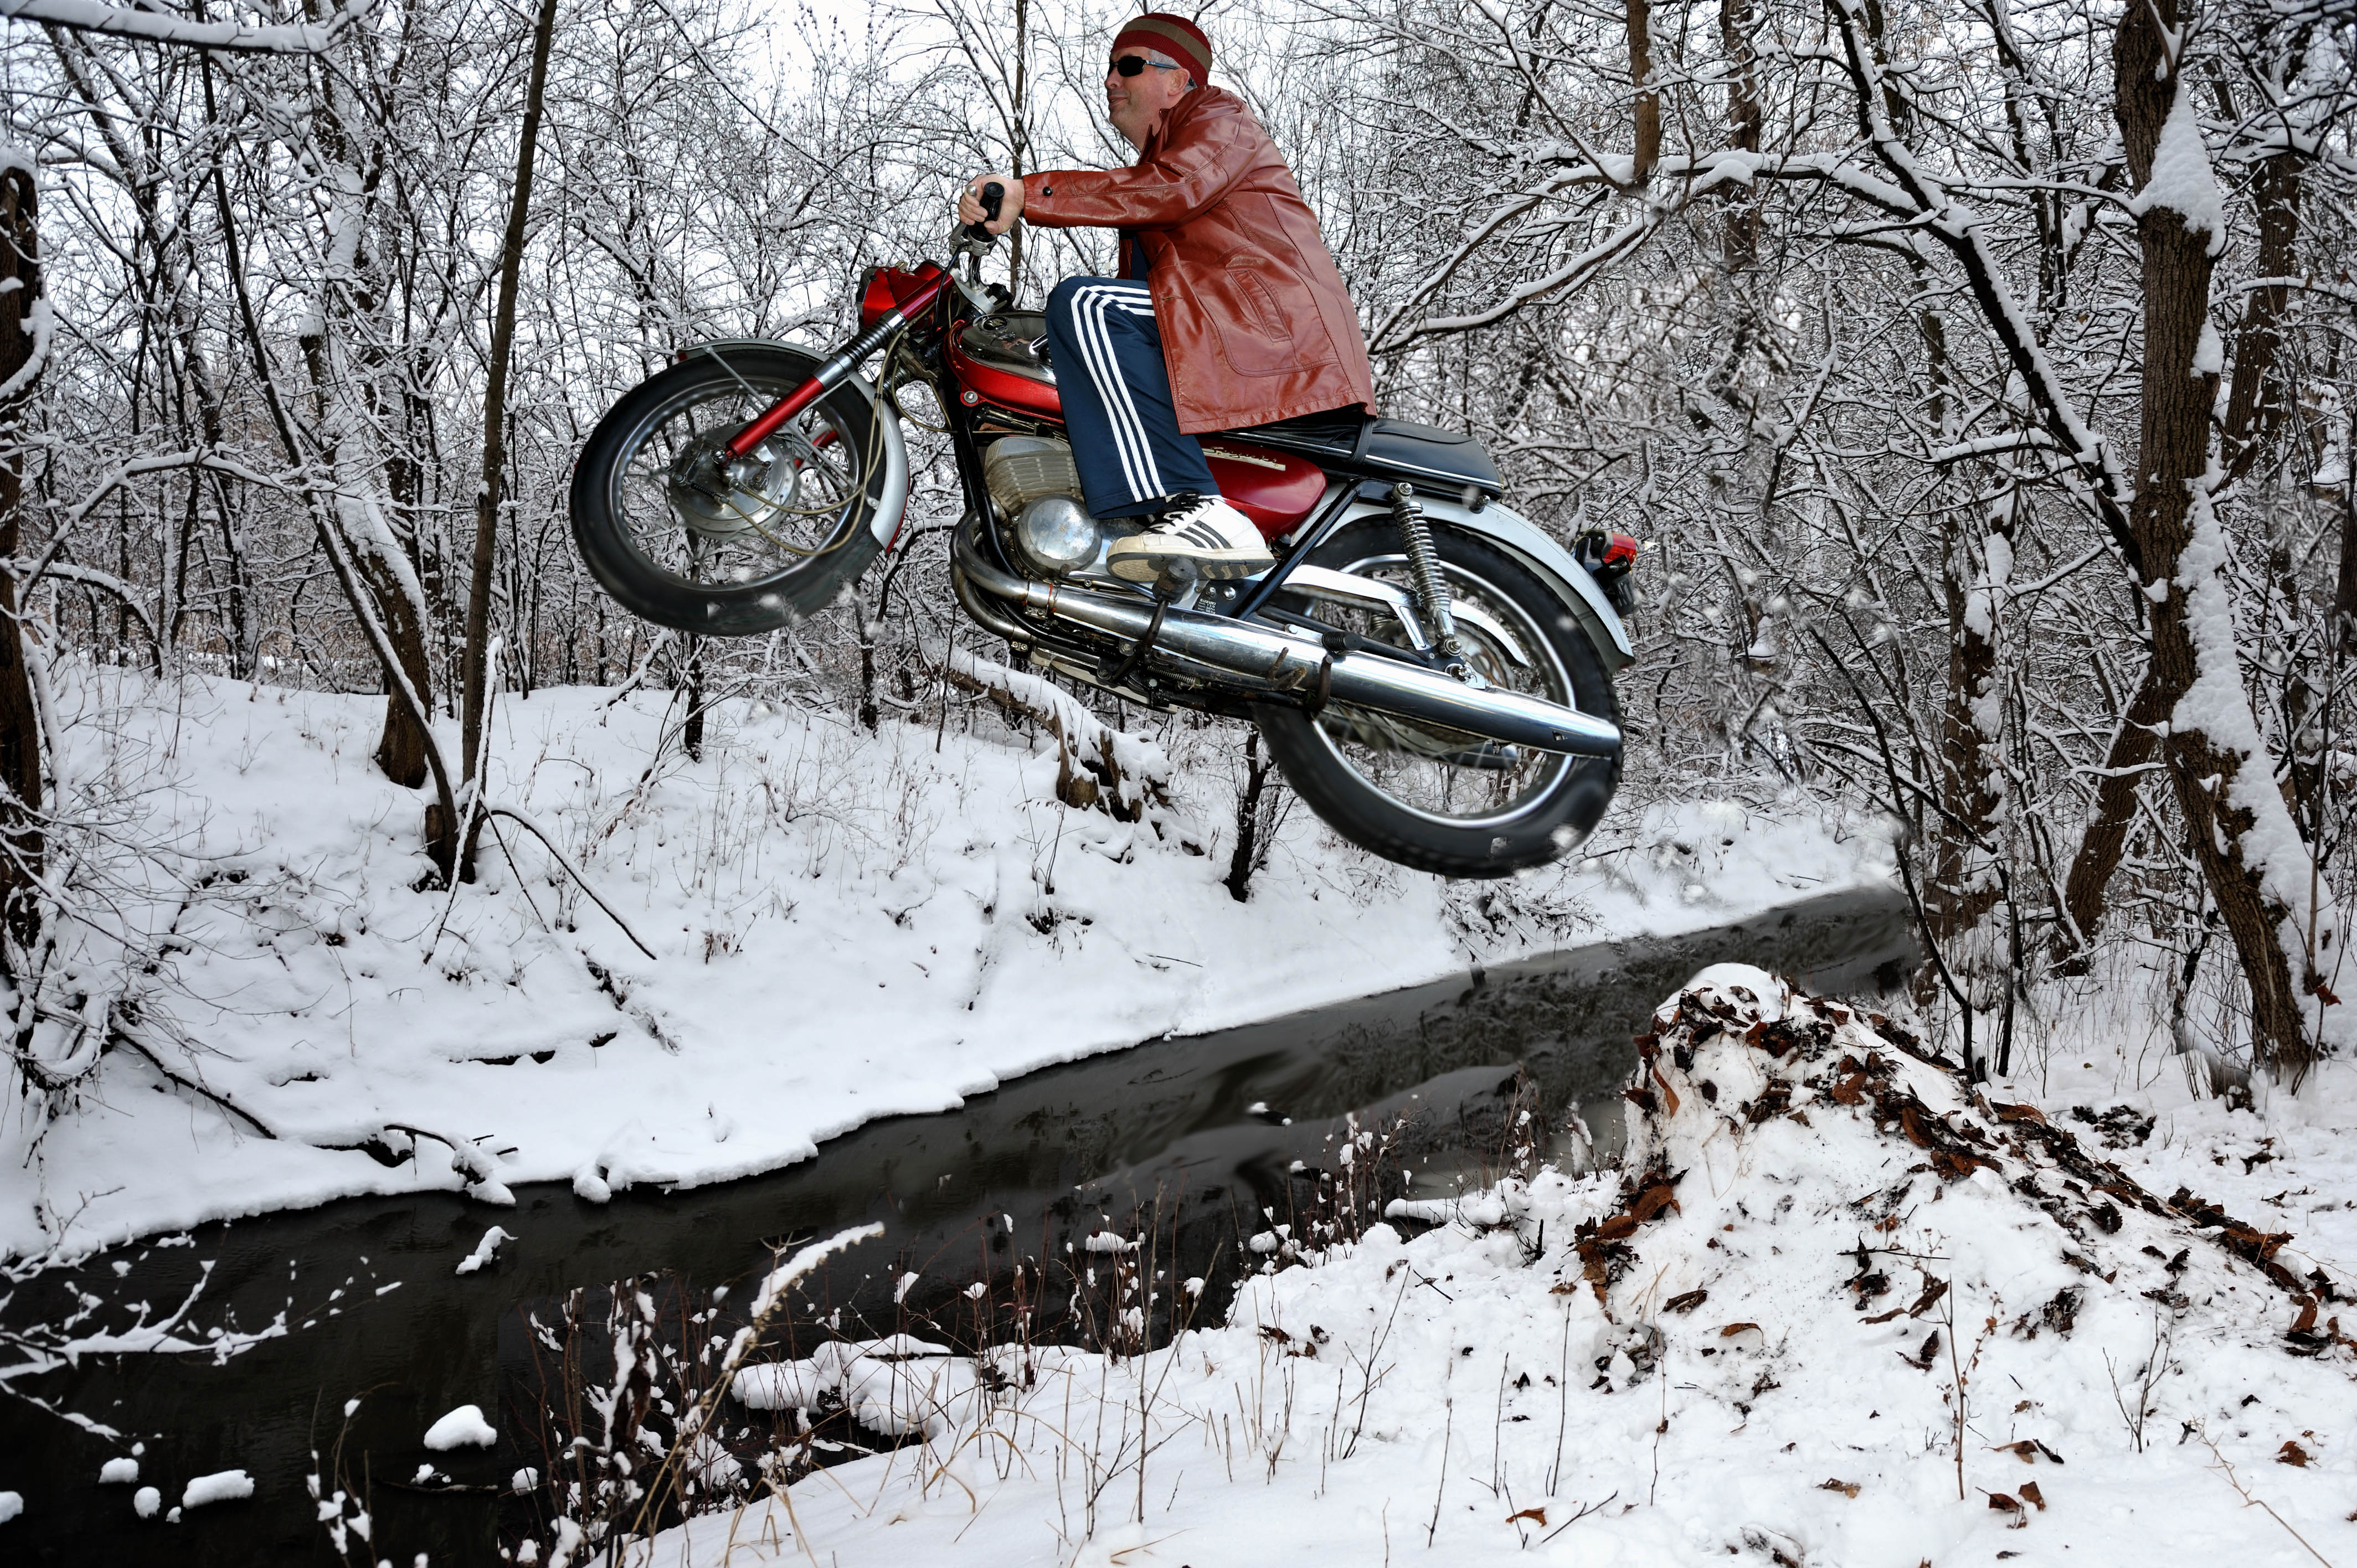 Who says you can't ride your motorcycle in the Winter? from